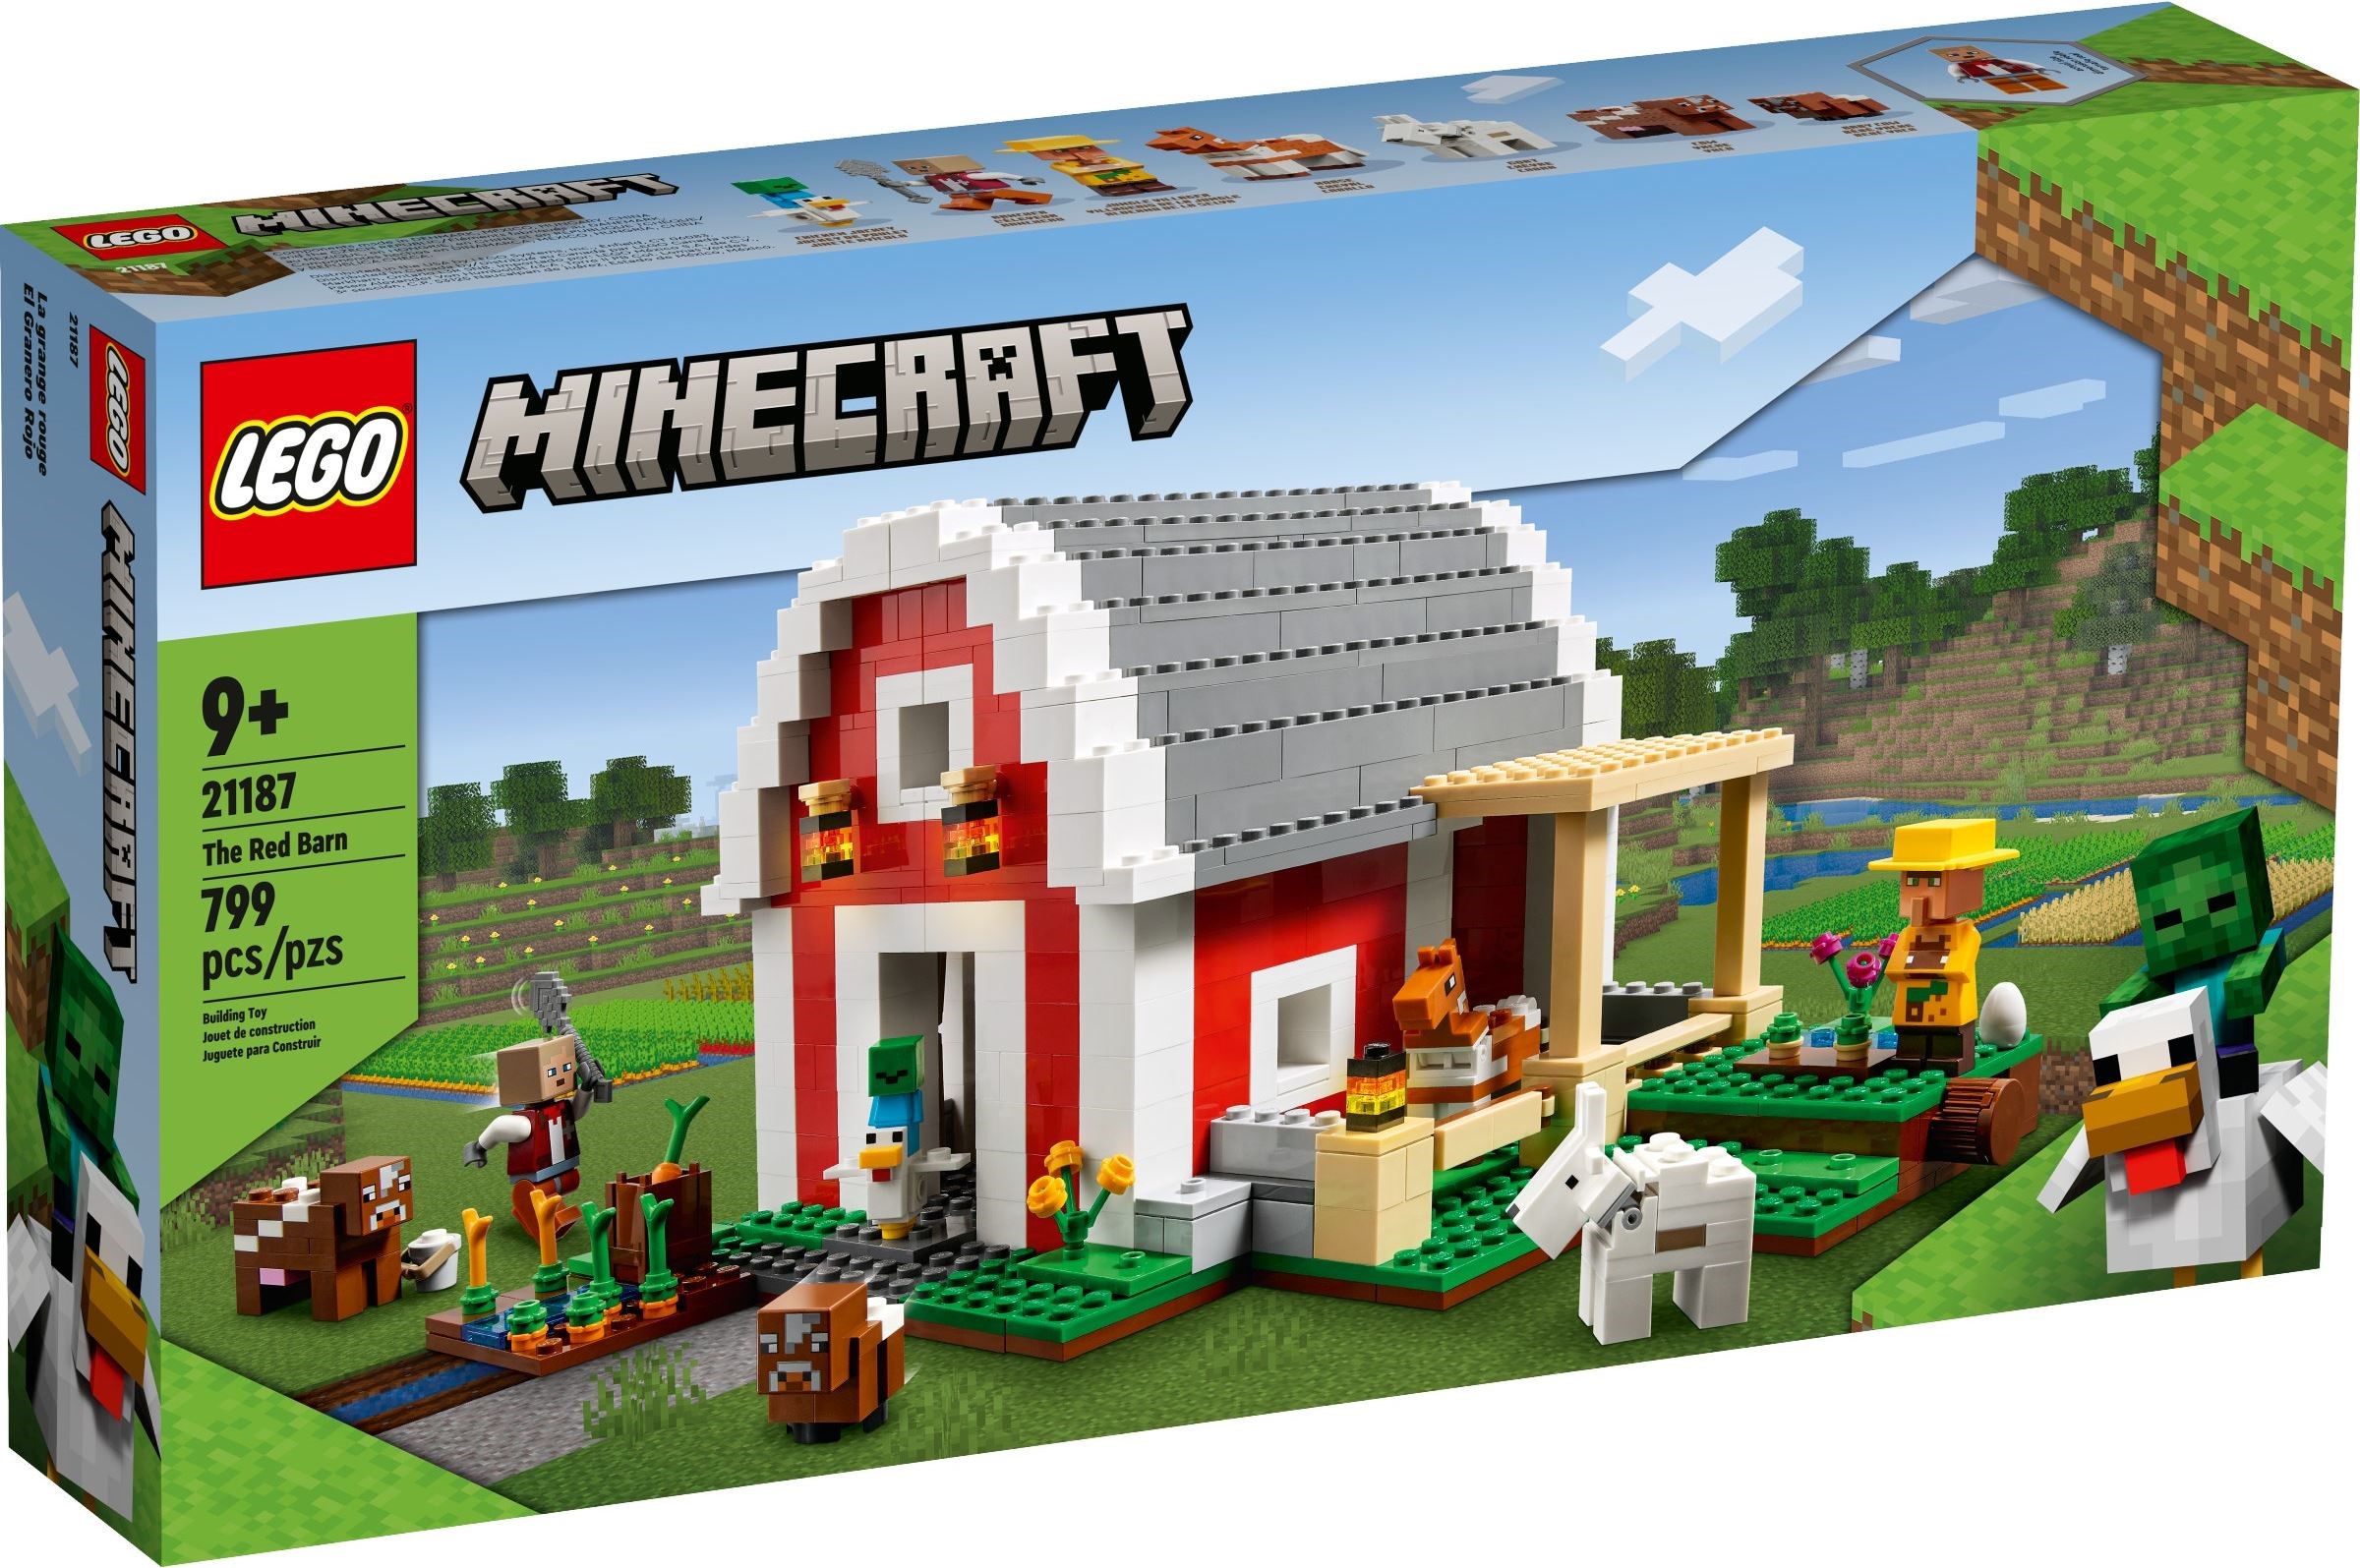 Review: 21187 The Red Barn | Brickset: LEGO set guide and database